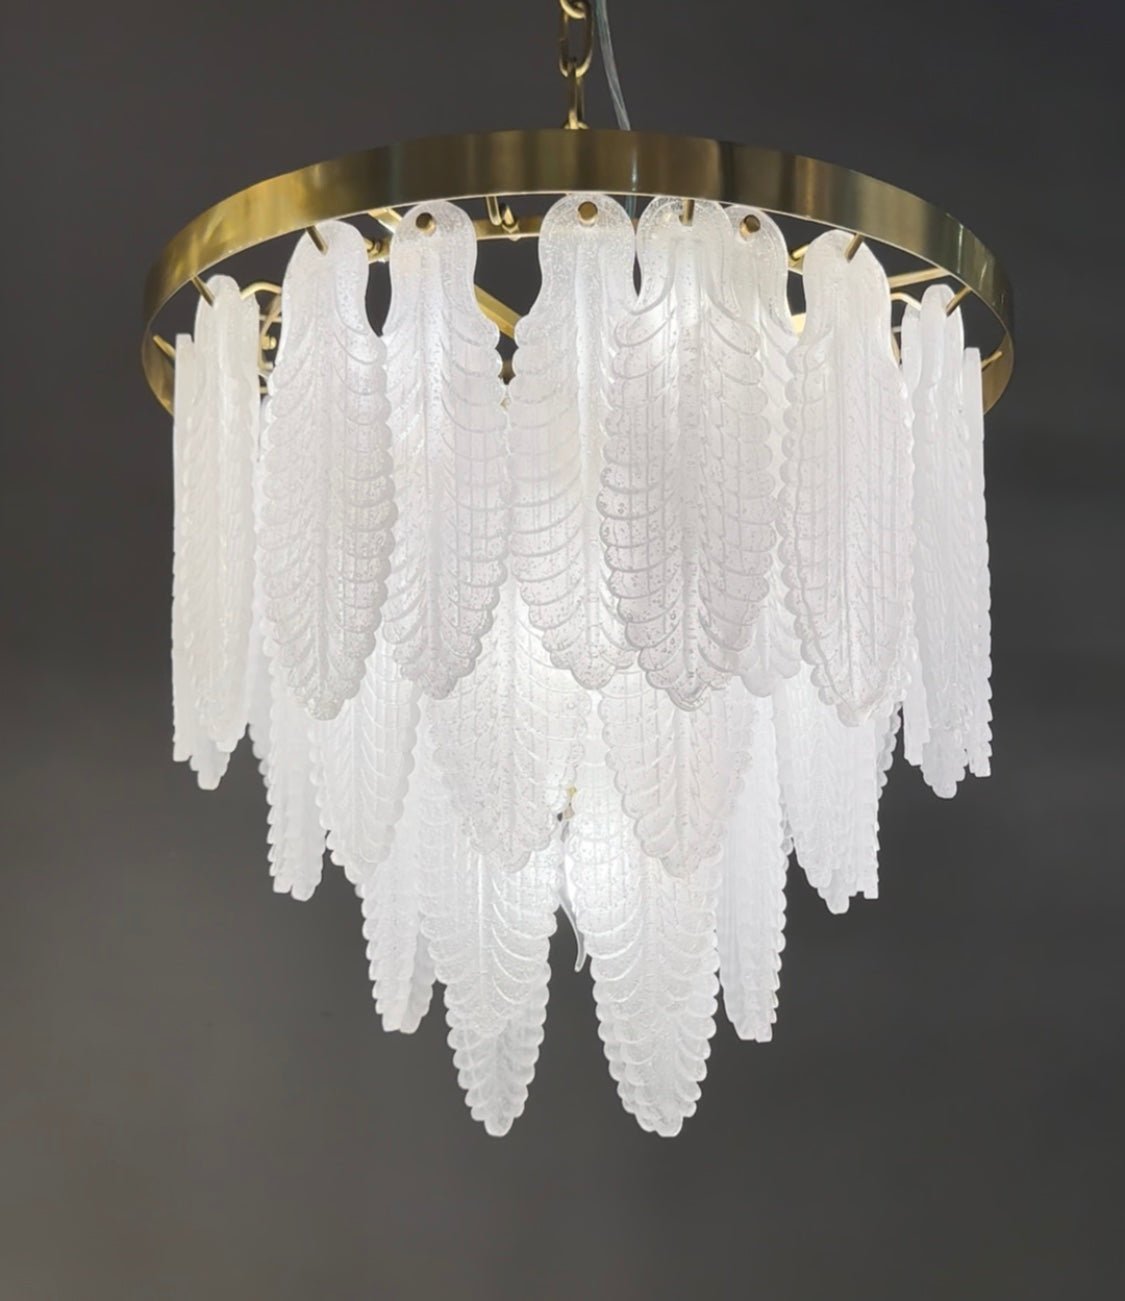 Tampa Leaf Round Tiered Glass Chandelier - Italian Concept